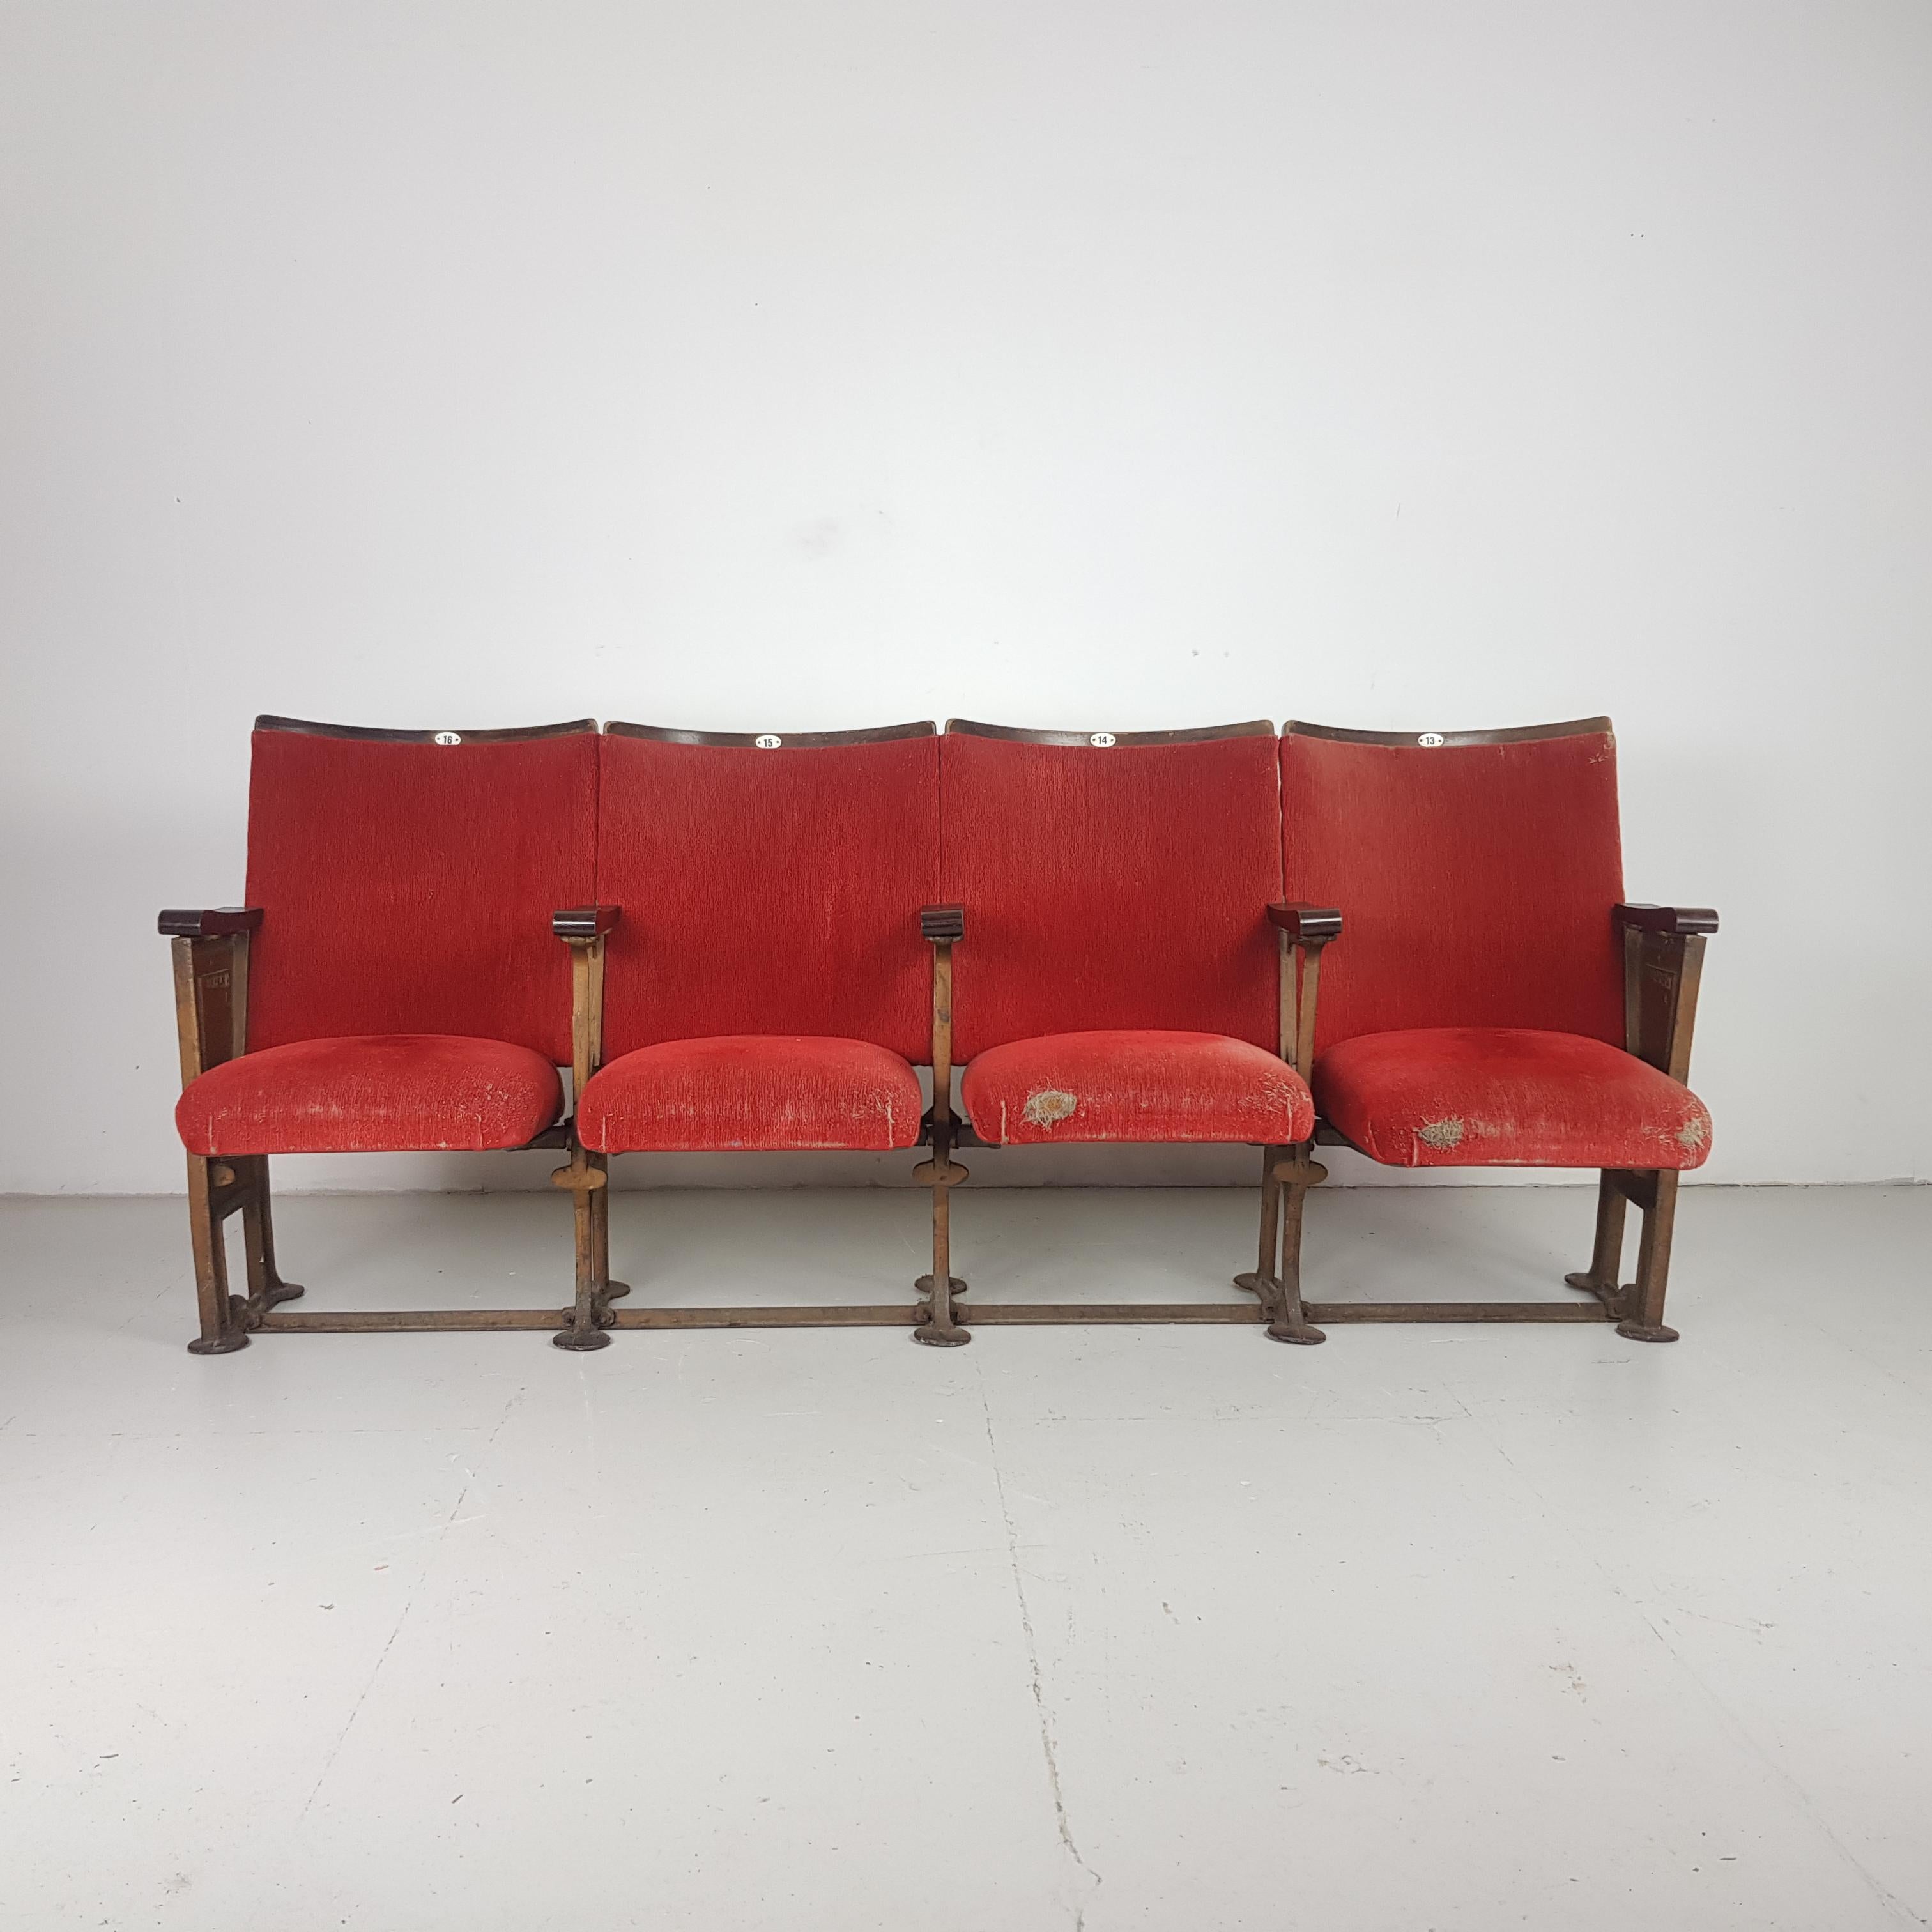 Lovely set of Art Deco cinema seats with original upholstery. These came from the old Curzon Cinema in Brighton which closed in the 1970s. 

Great in a hallway.

In vintage condition - the upholstery has a lot of wear, but this all part of the